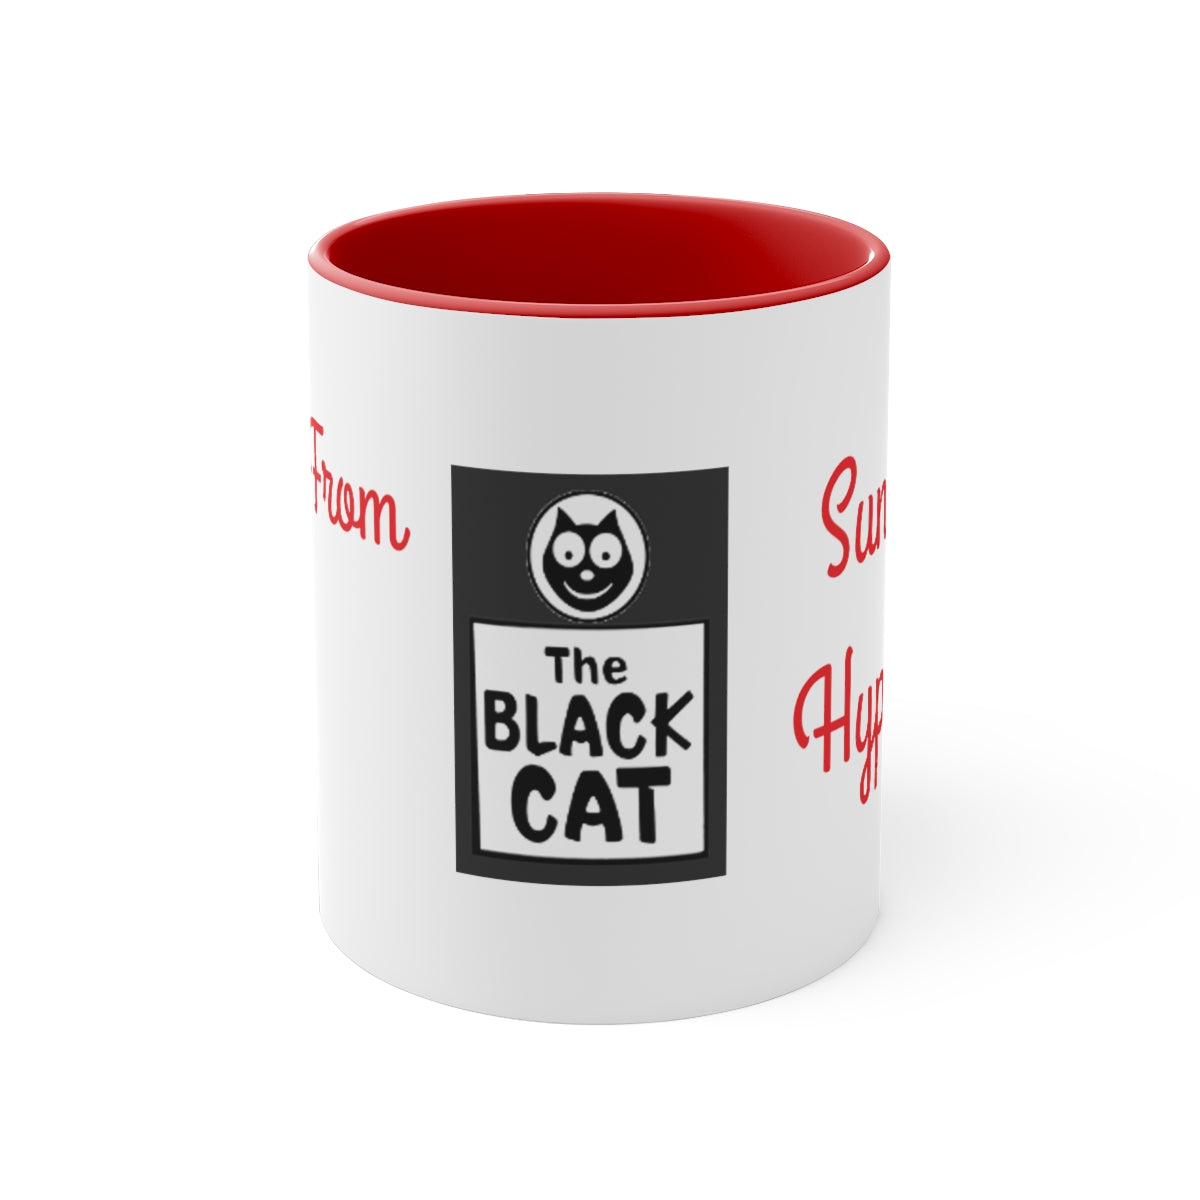 Stolen from The Black Cat Accent Coffee Mug, 11oz